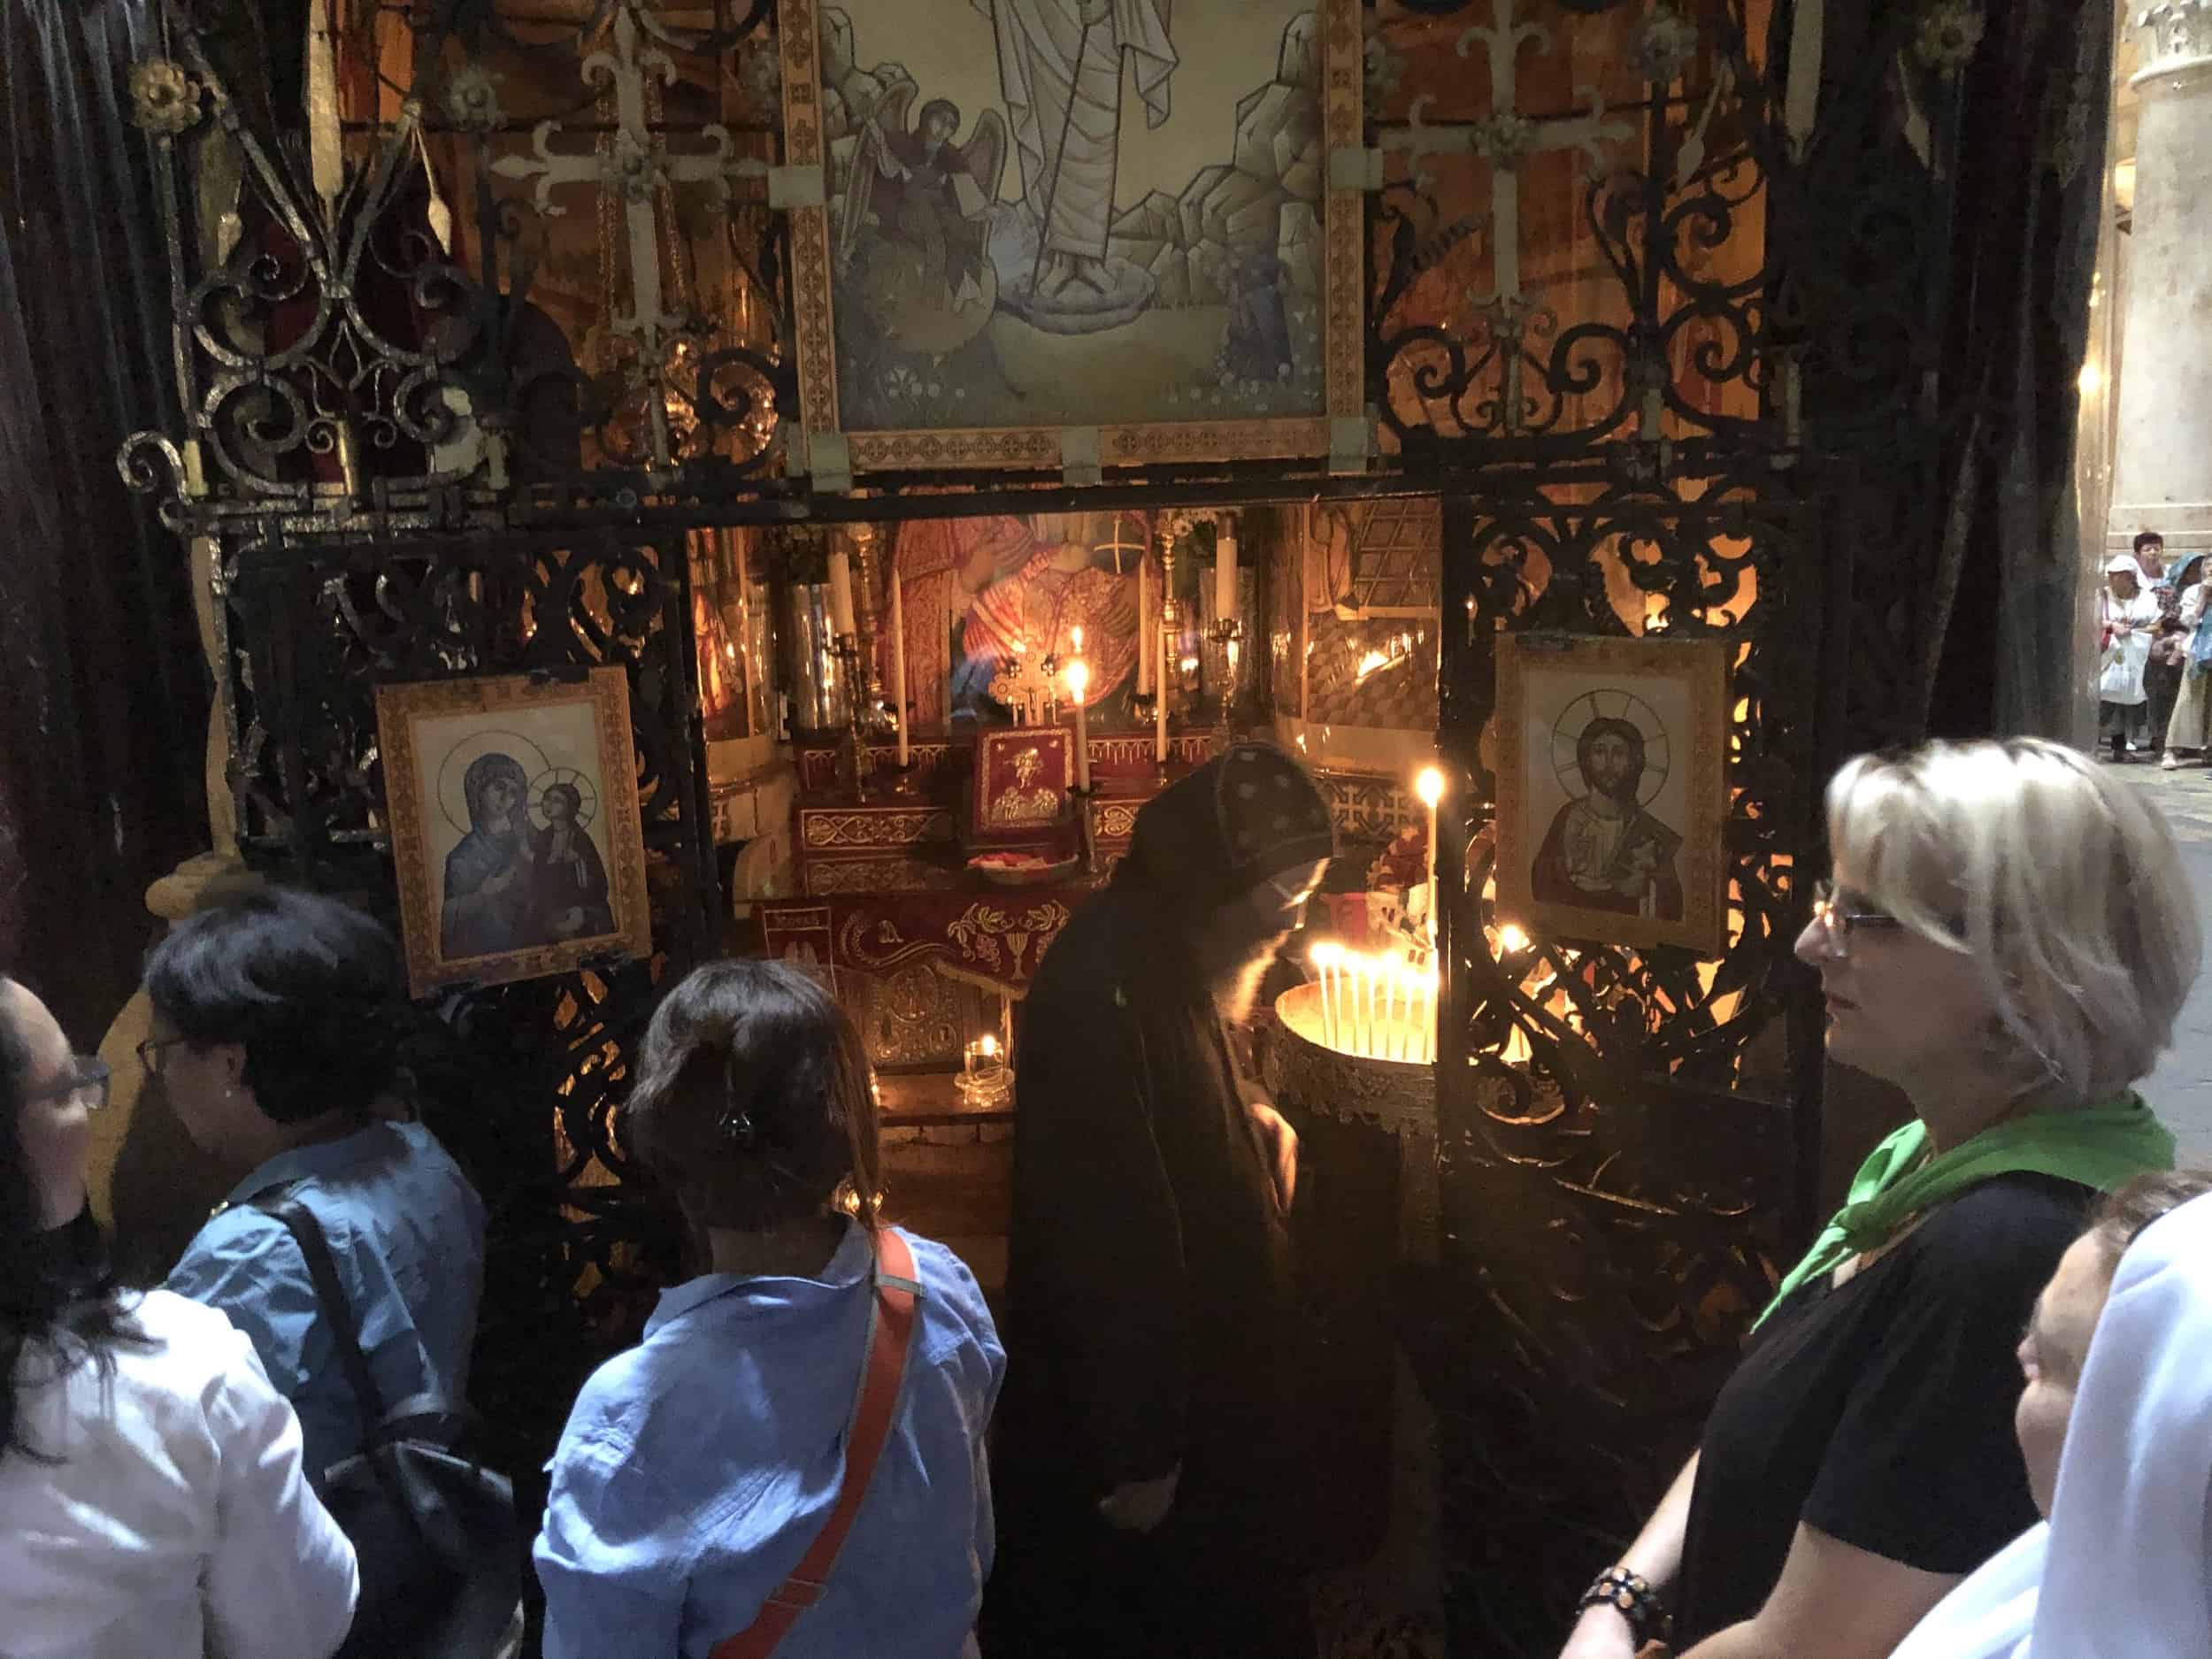 Looking into the Coptic Chapel at the Church of the Holy Sepulchre in Jerusalem